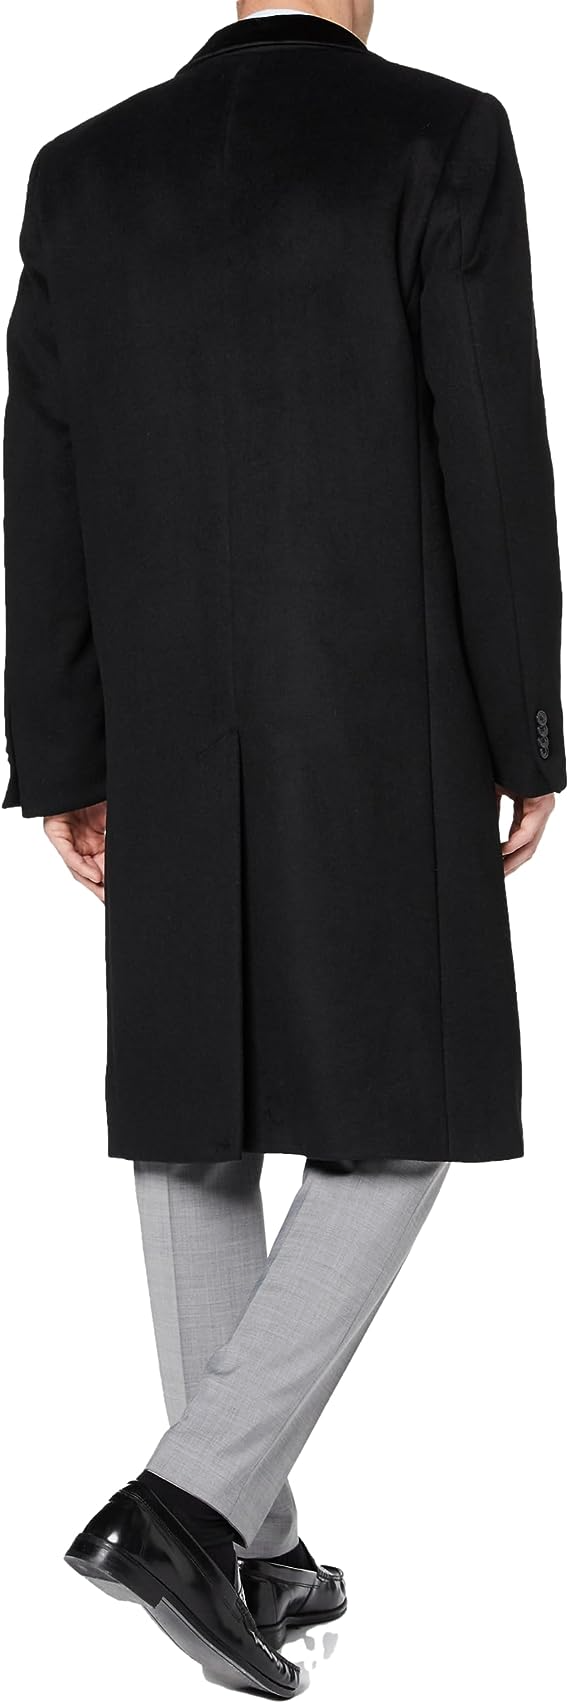 Black Wool Overcoat with Red Satin Lining- Brand New